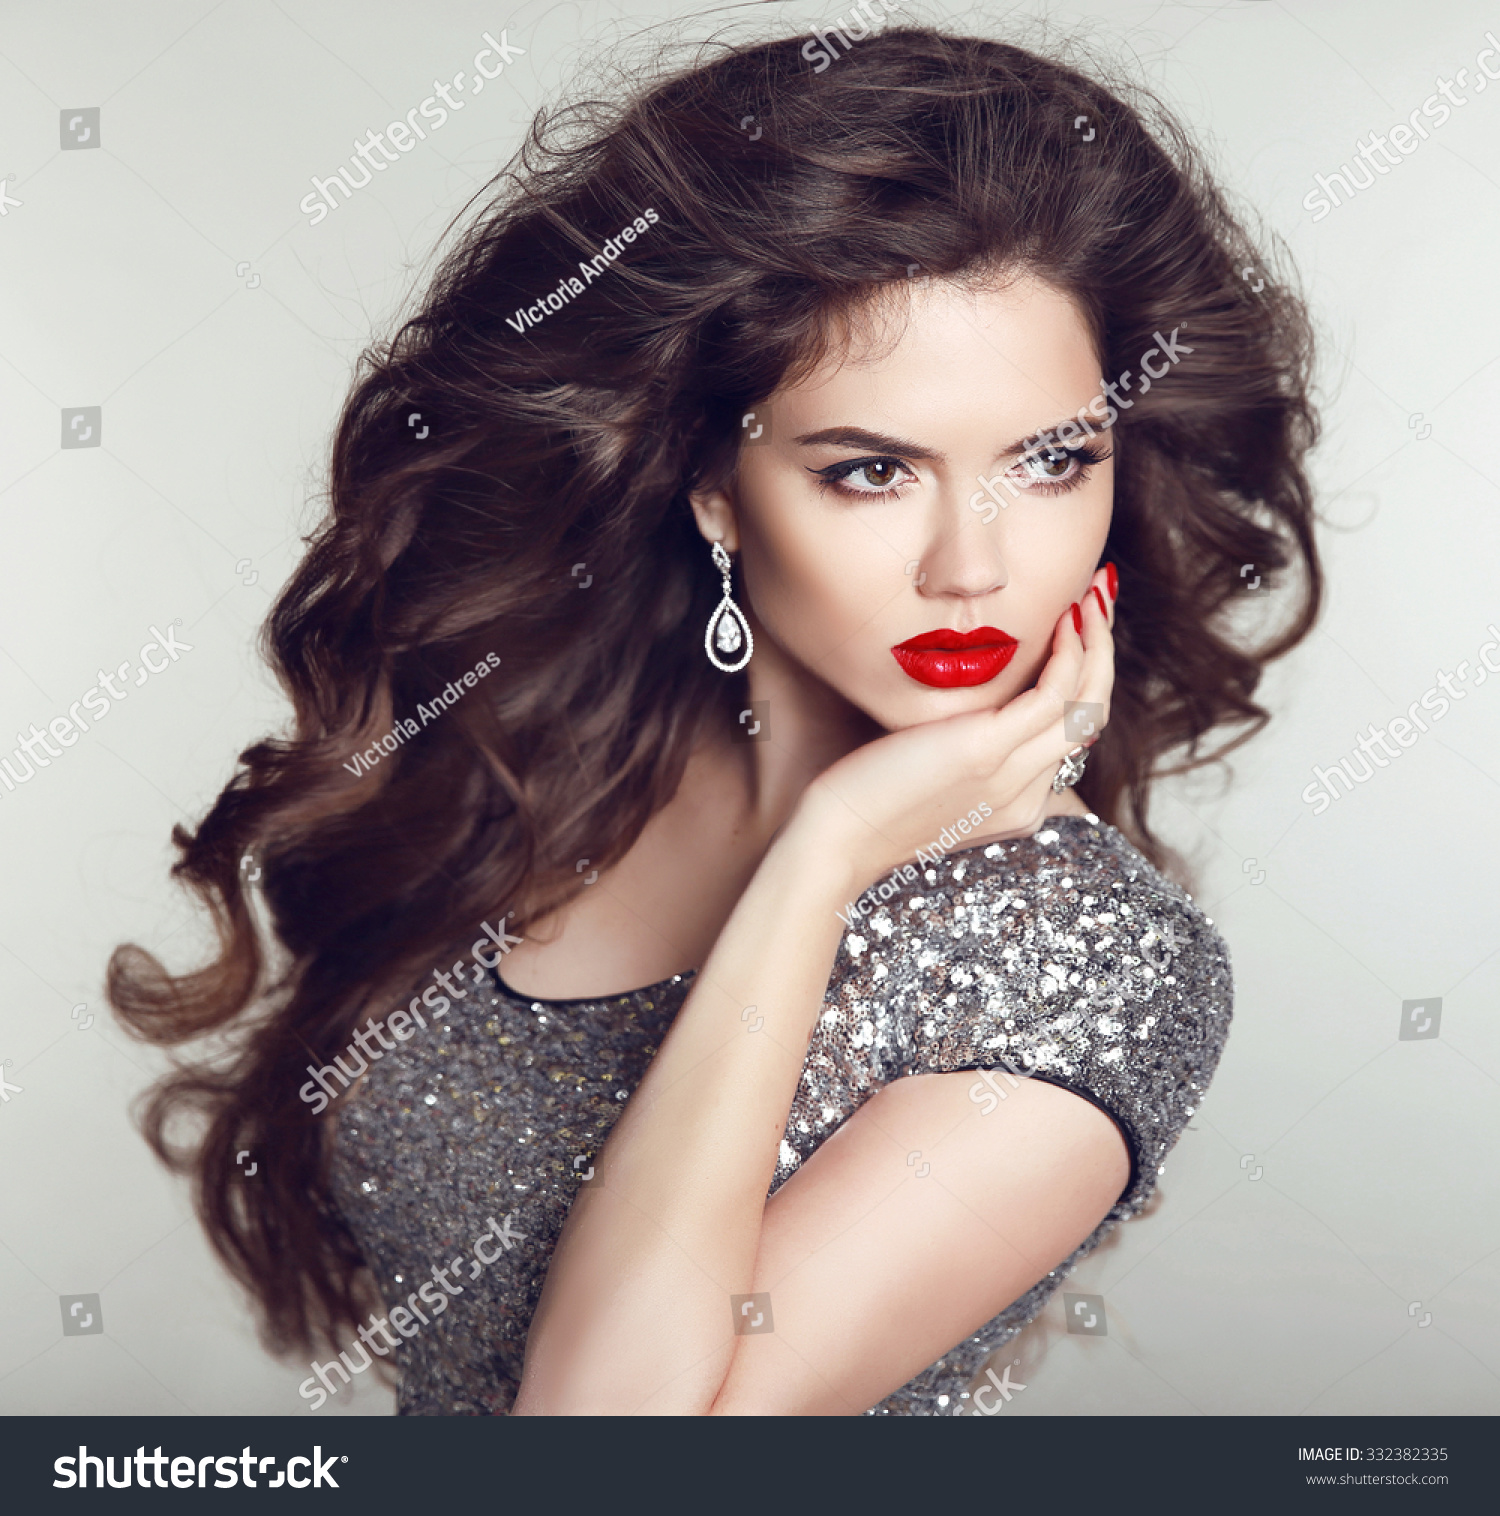 Hairstyle Luxury Jewelry Beauty Fashion Girl Model Portrait Red Lips Healthy Long Hair 